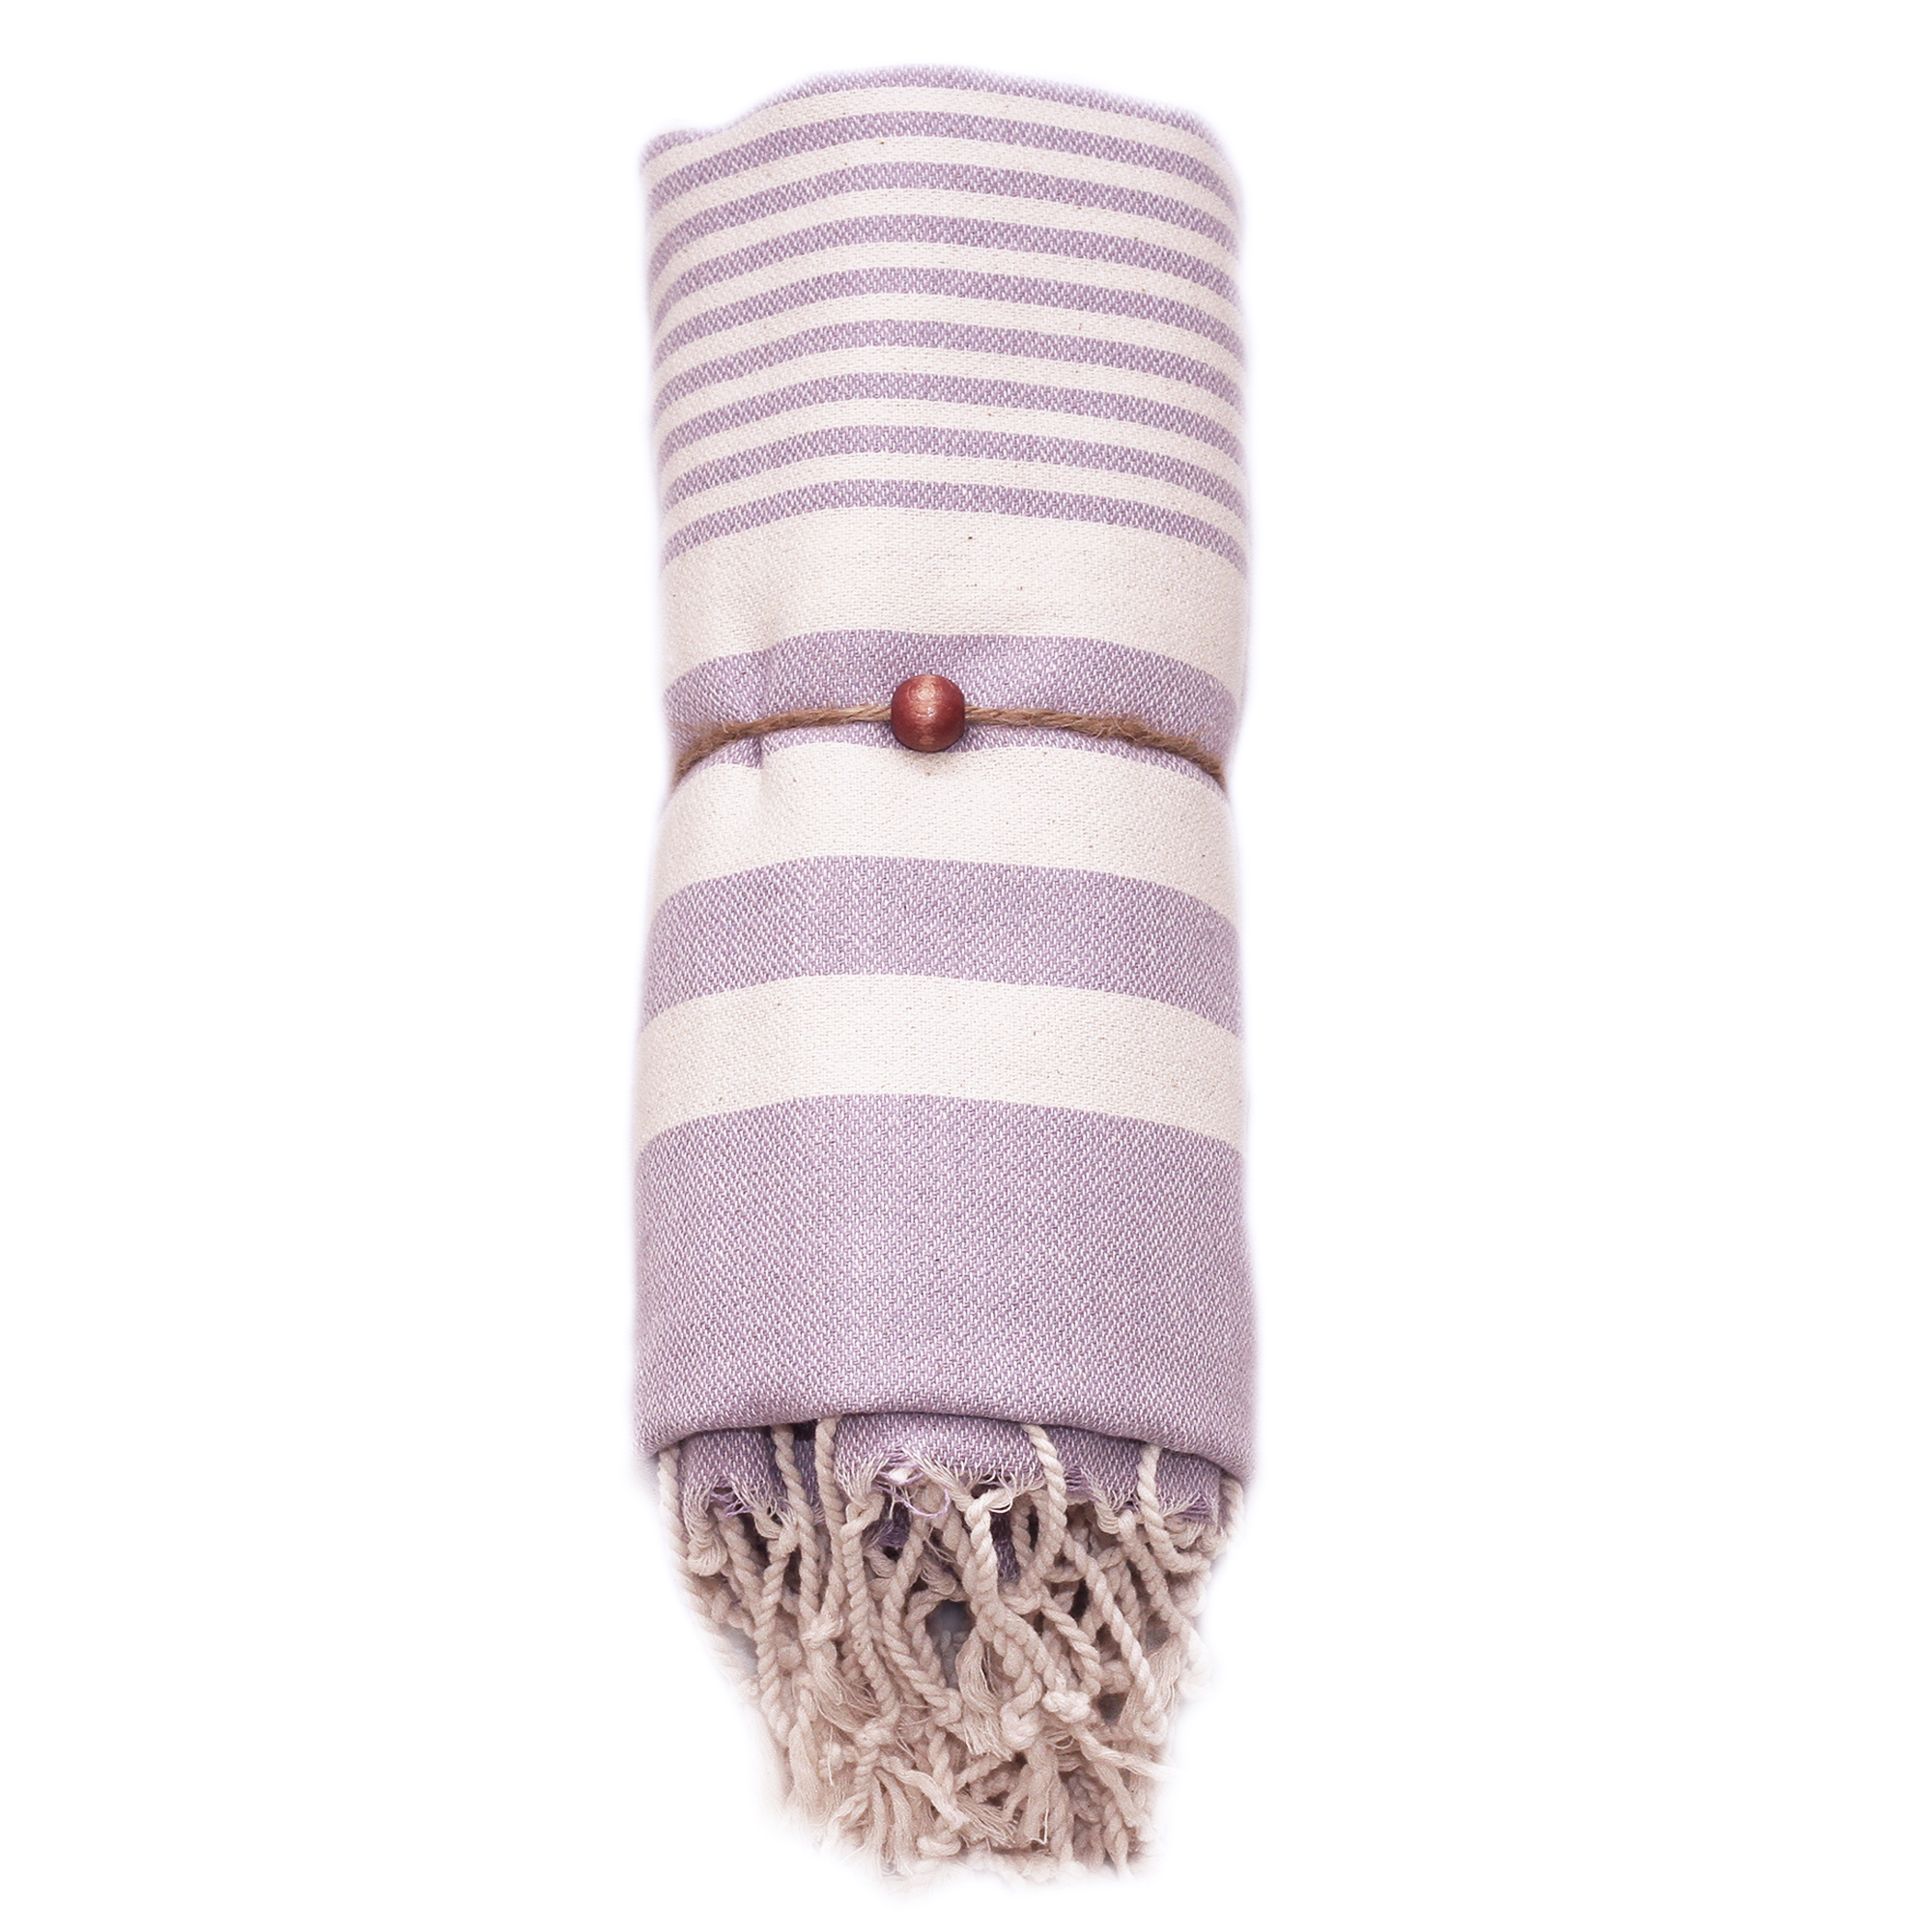 Made at hand Handwoven Beach Towel/Blanket in Lilac